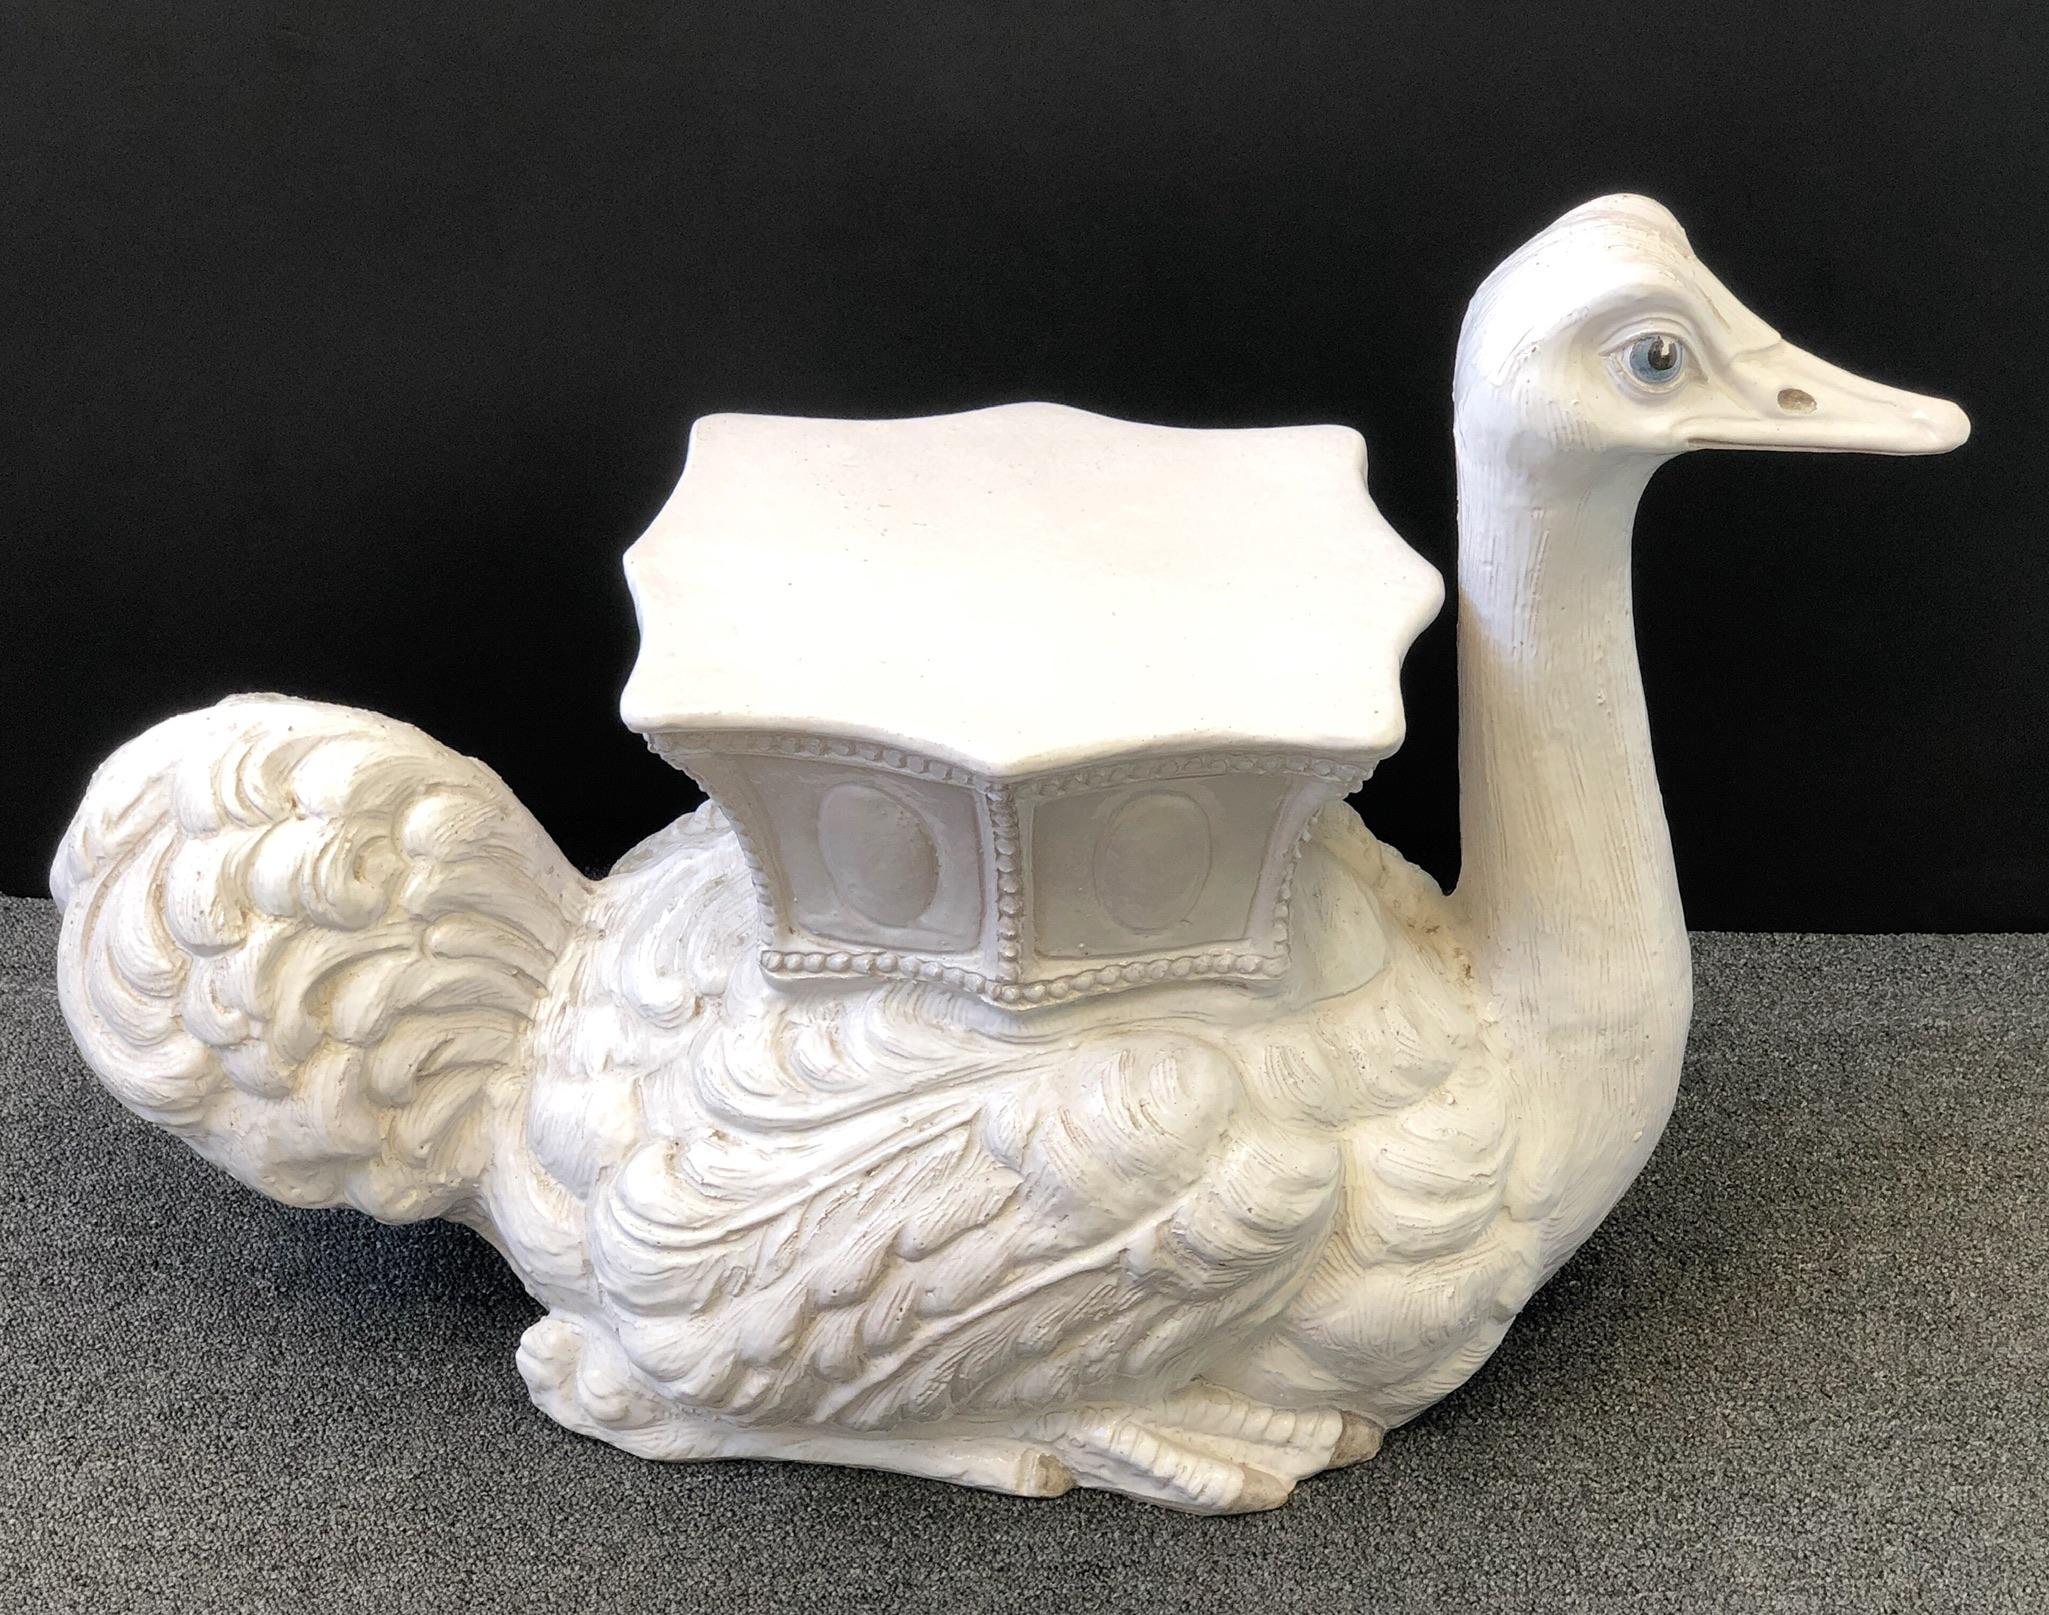 A fabulous white glazed ceramic ostrich garden seat or side table from the 1960s. The ostrich is made out of terracotta and hand painted white glazed. Marked Italy in the underside.
Overall dimensions: 20” high 31” wide 15” deep 14.25” seat.